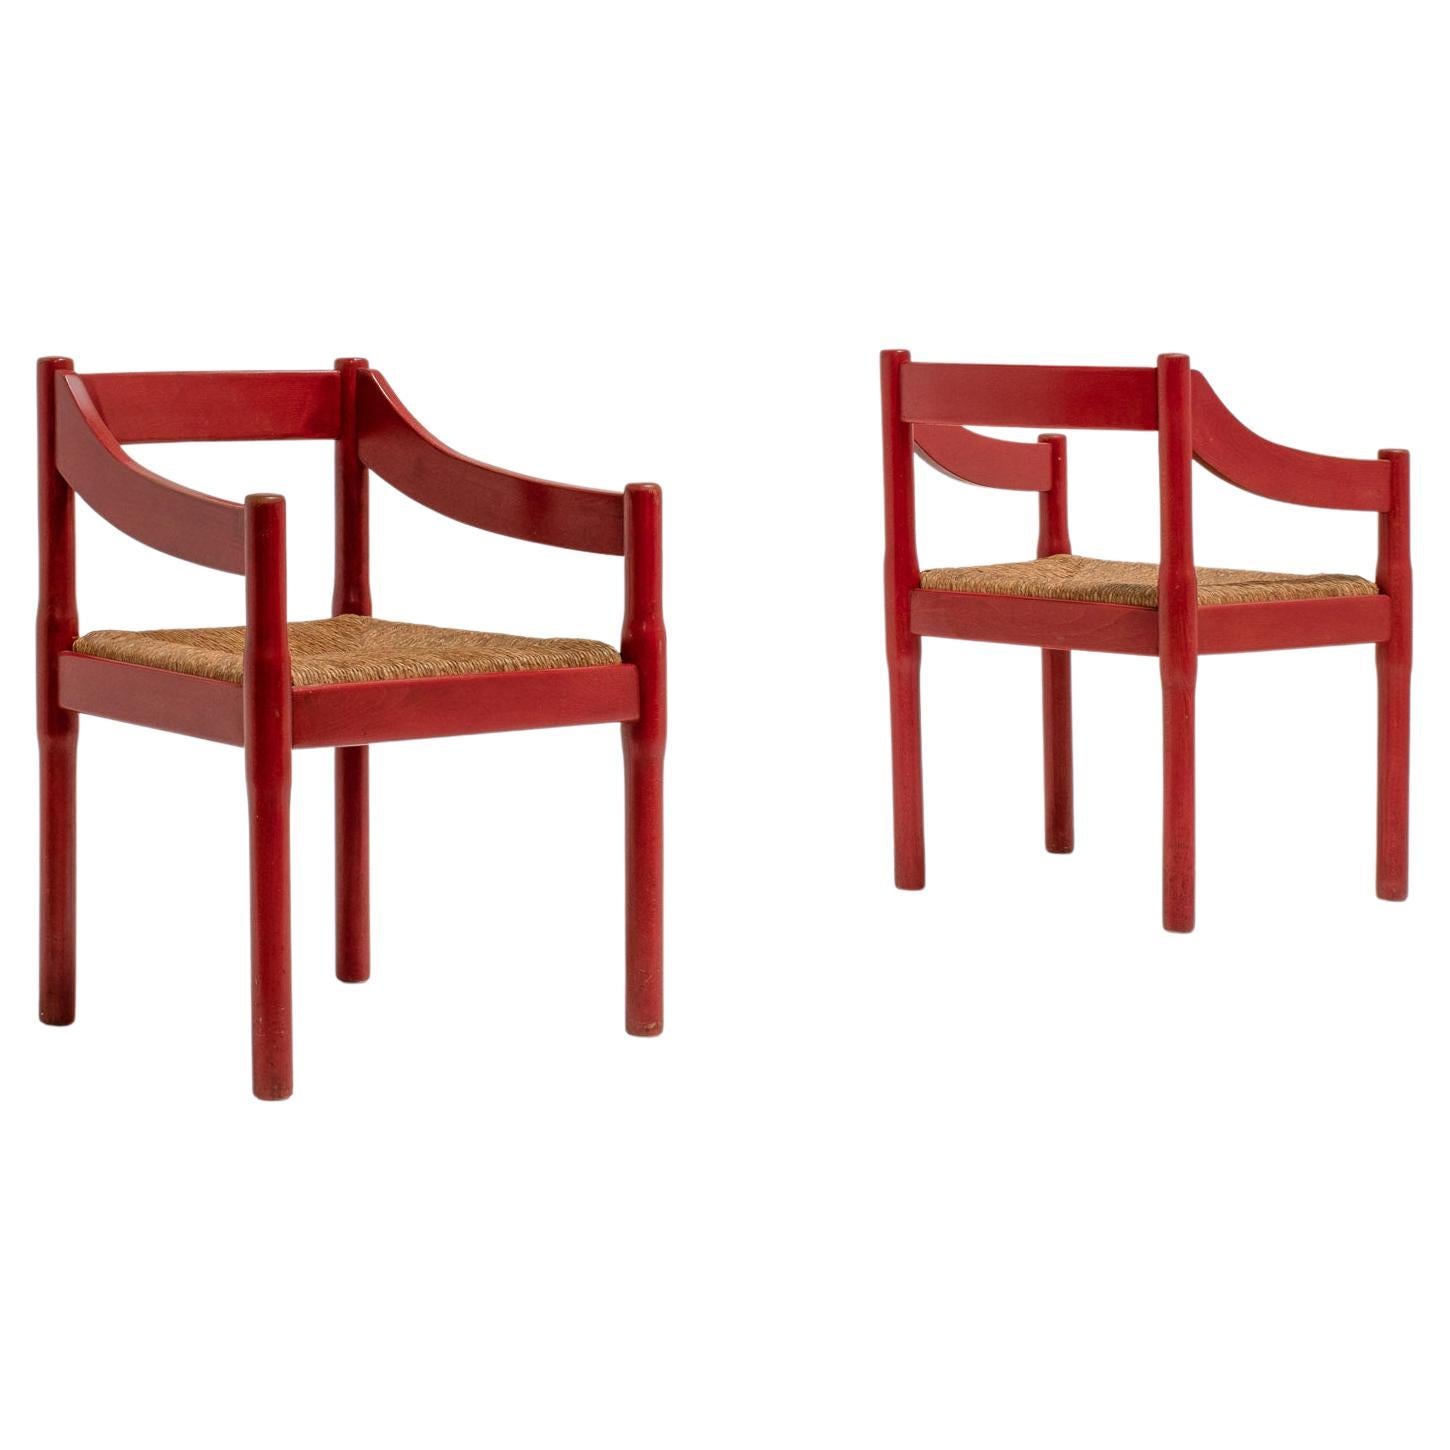 Pair of Carimate Chairs by Vico Magistretti for Cassina, 1960s